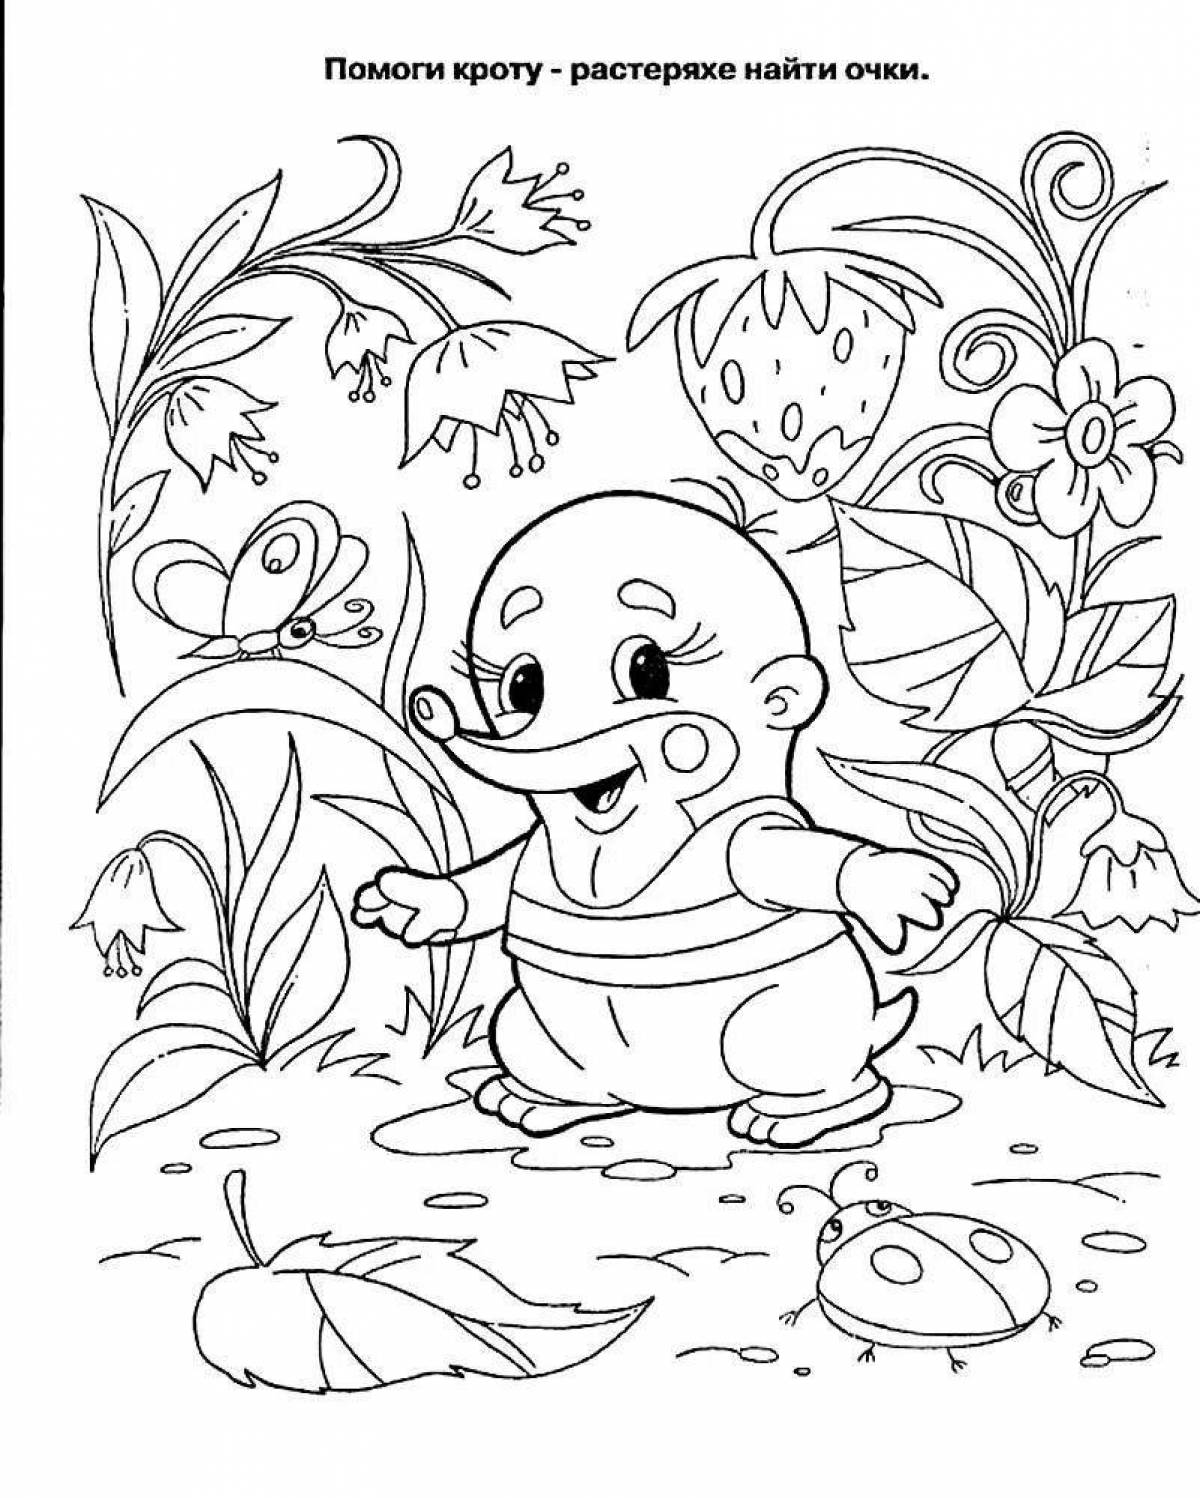 Decorated copy of the coloring page